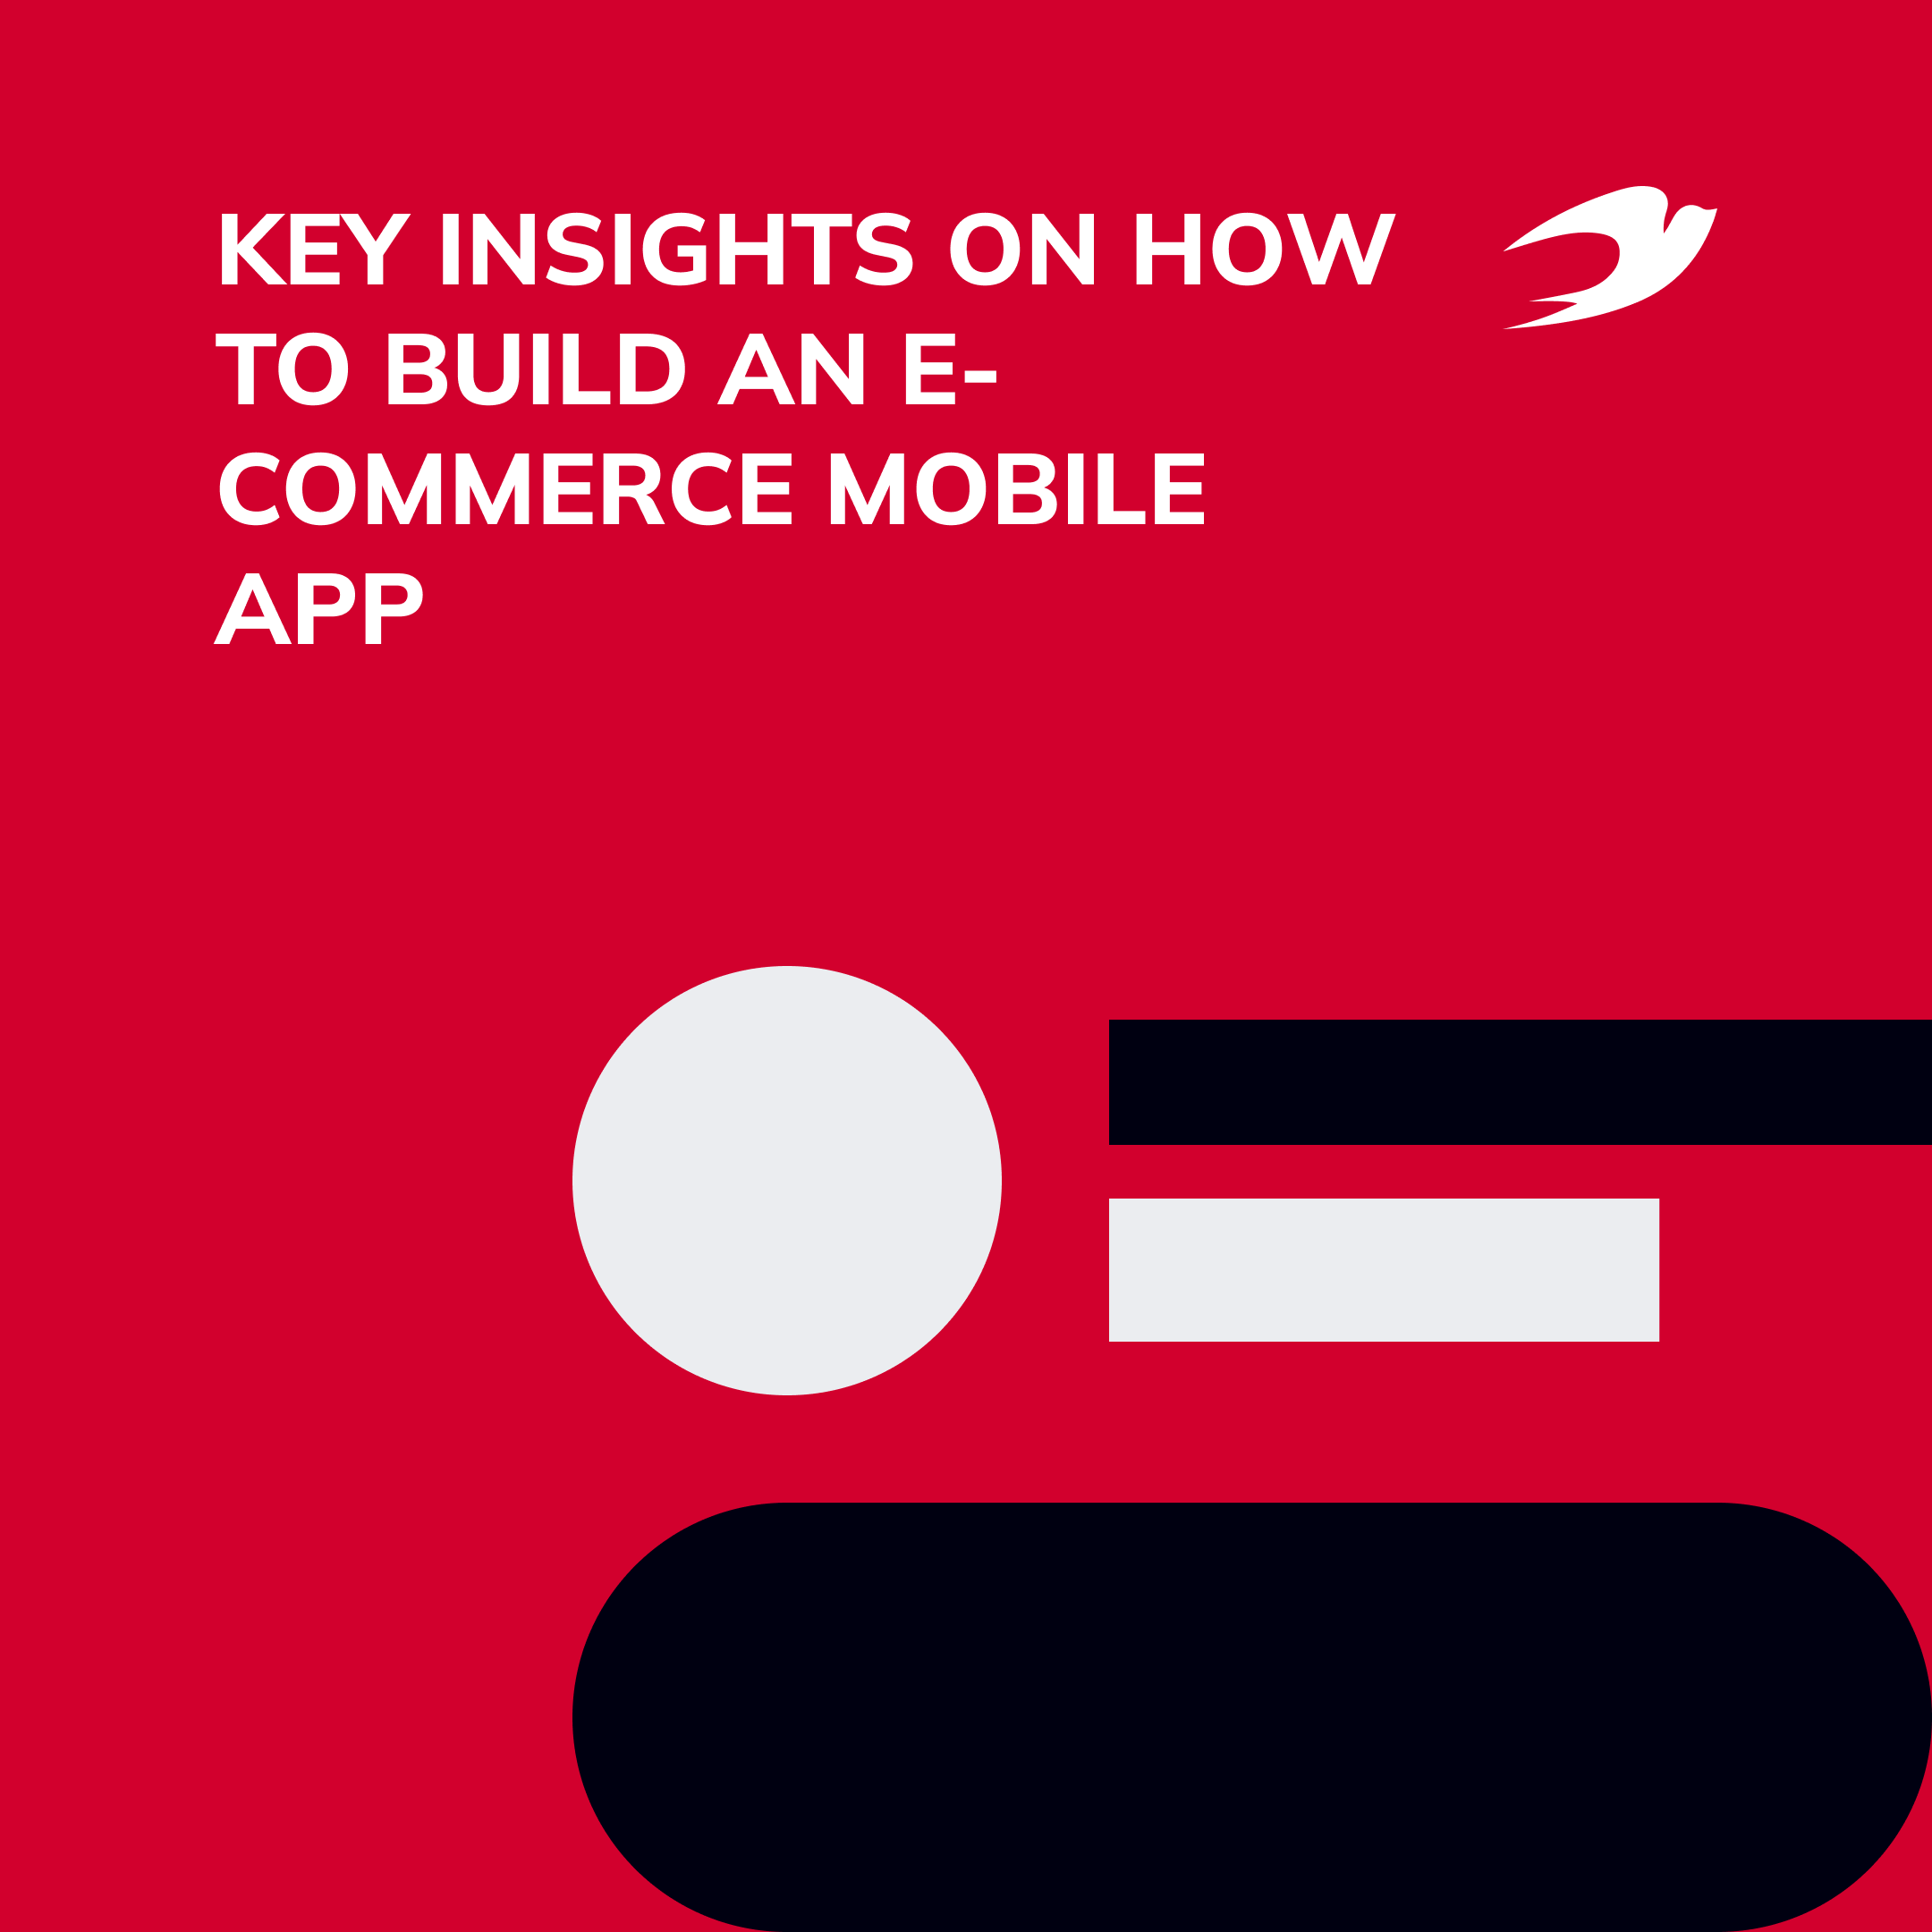 Key Insights on How to Build an E-commerce Mobile App